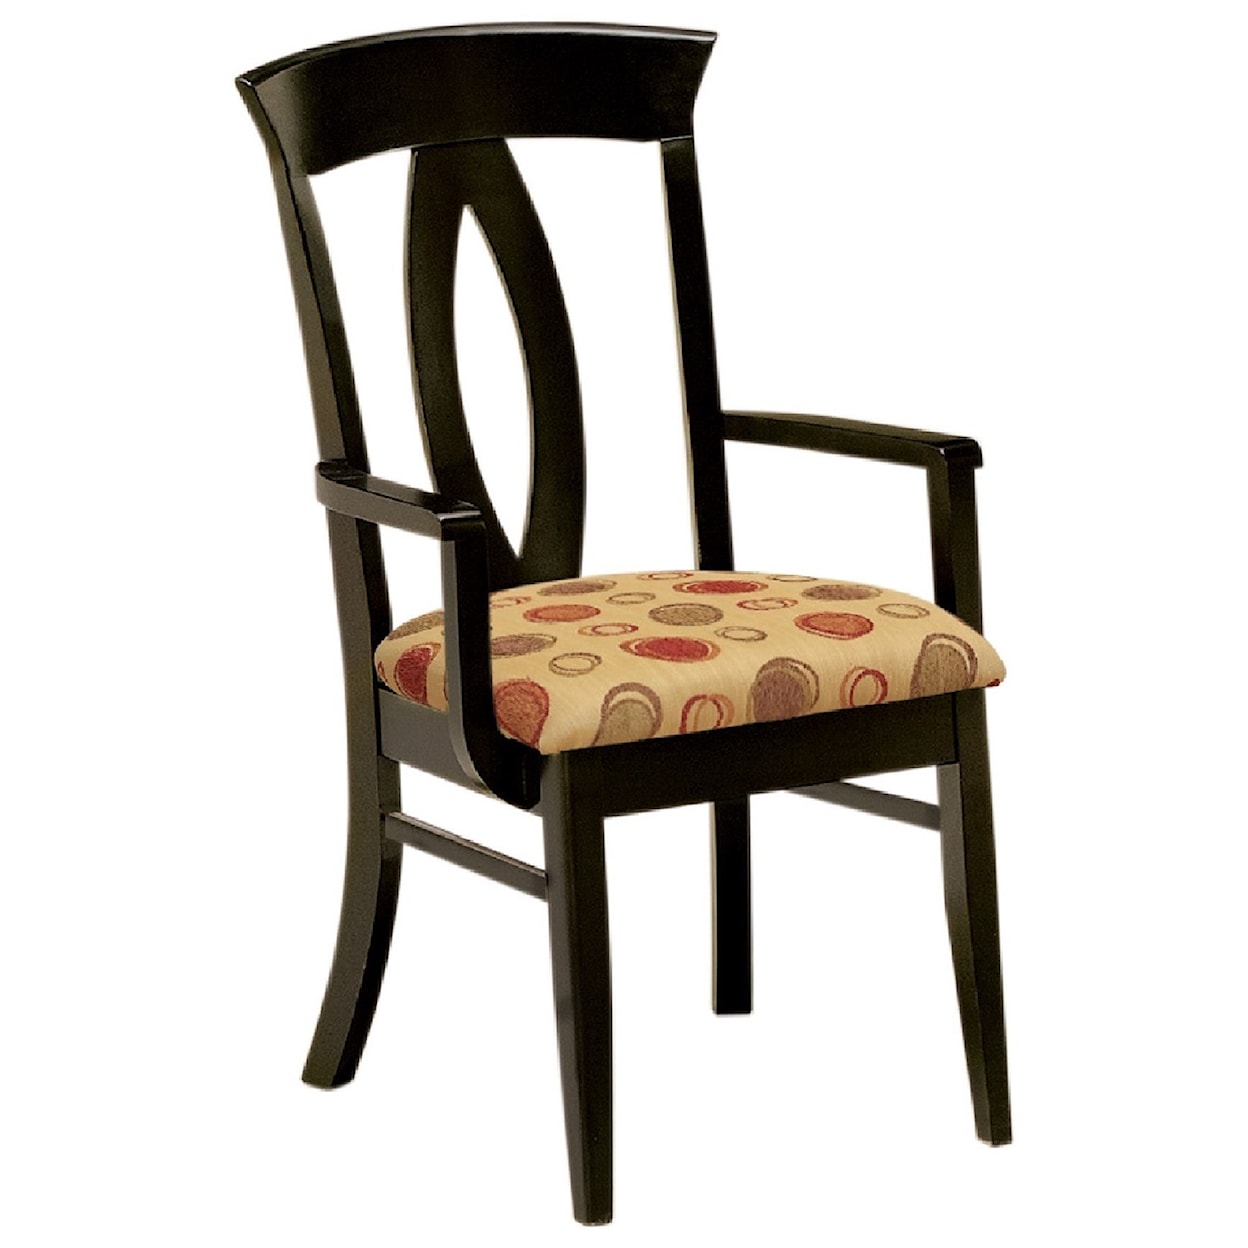 F&N Woodworking Brookfield Arm Chair - Leather Seat